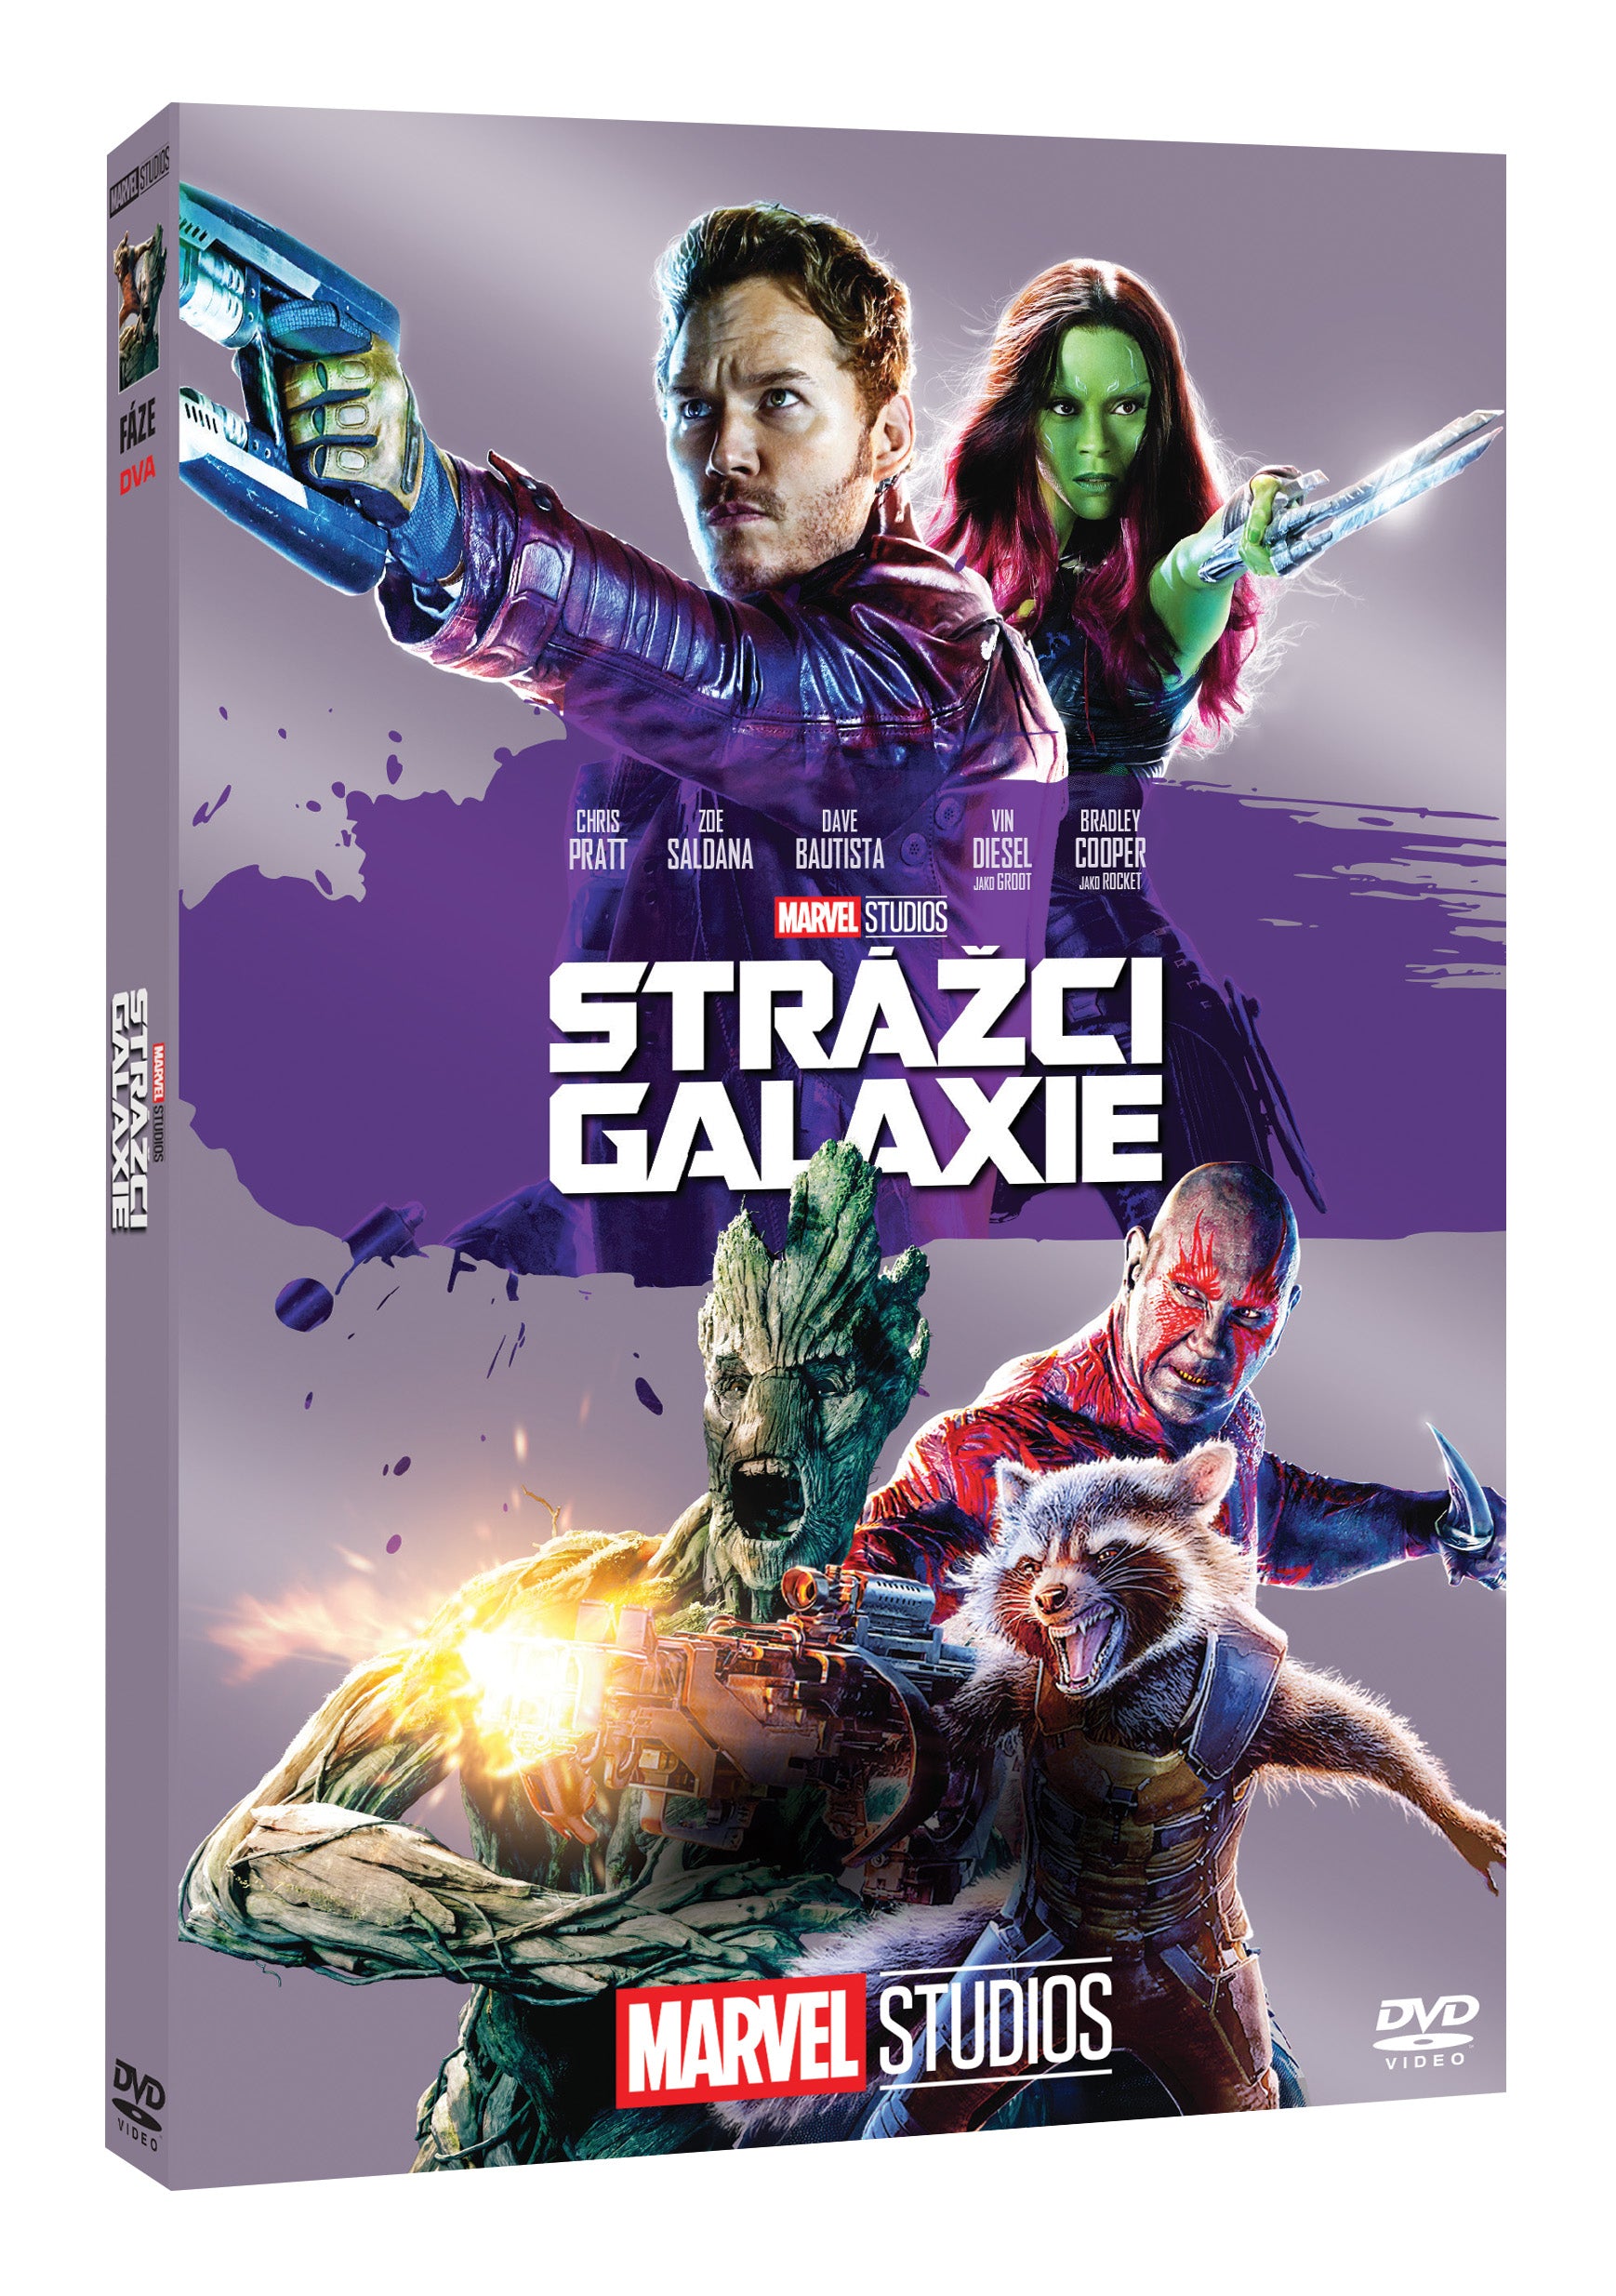 Strazci Galaxie DVD – Edice Marvel 10 let / Guardians of the Galaxy